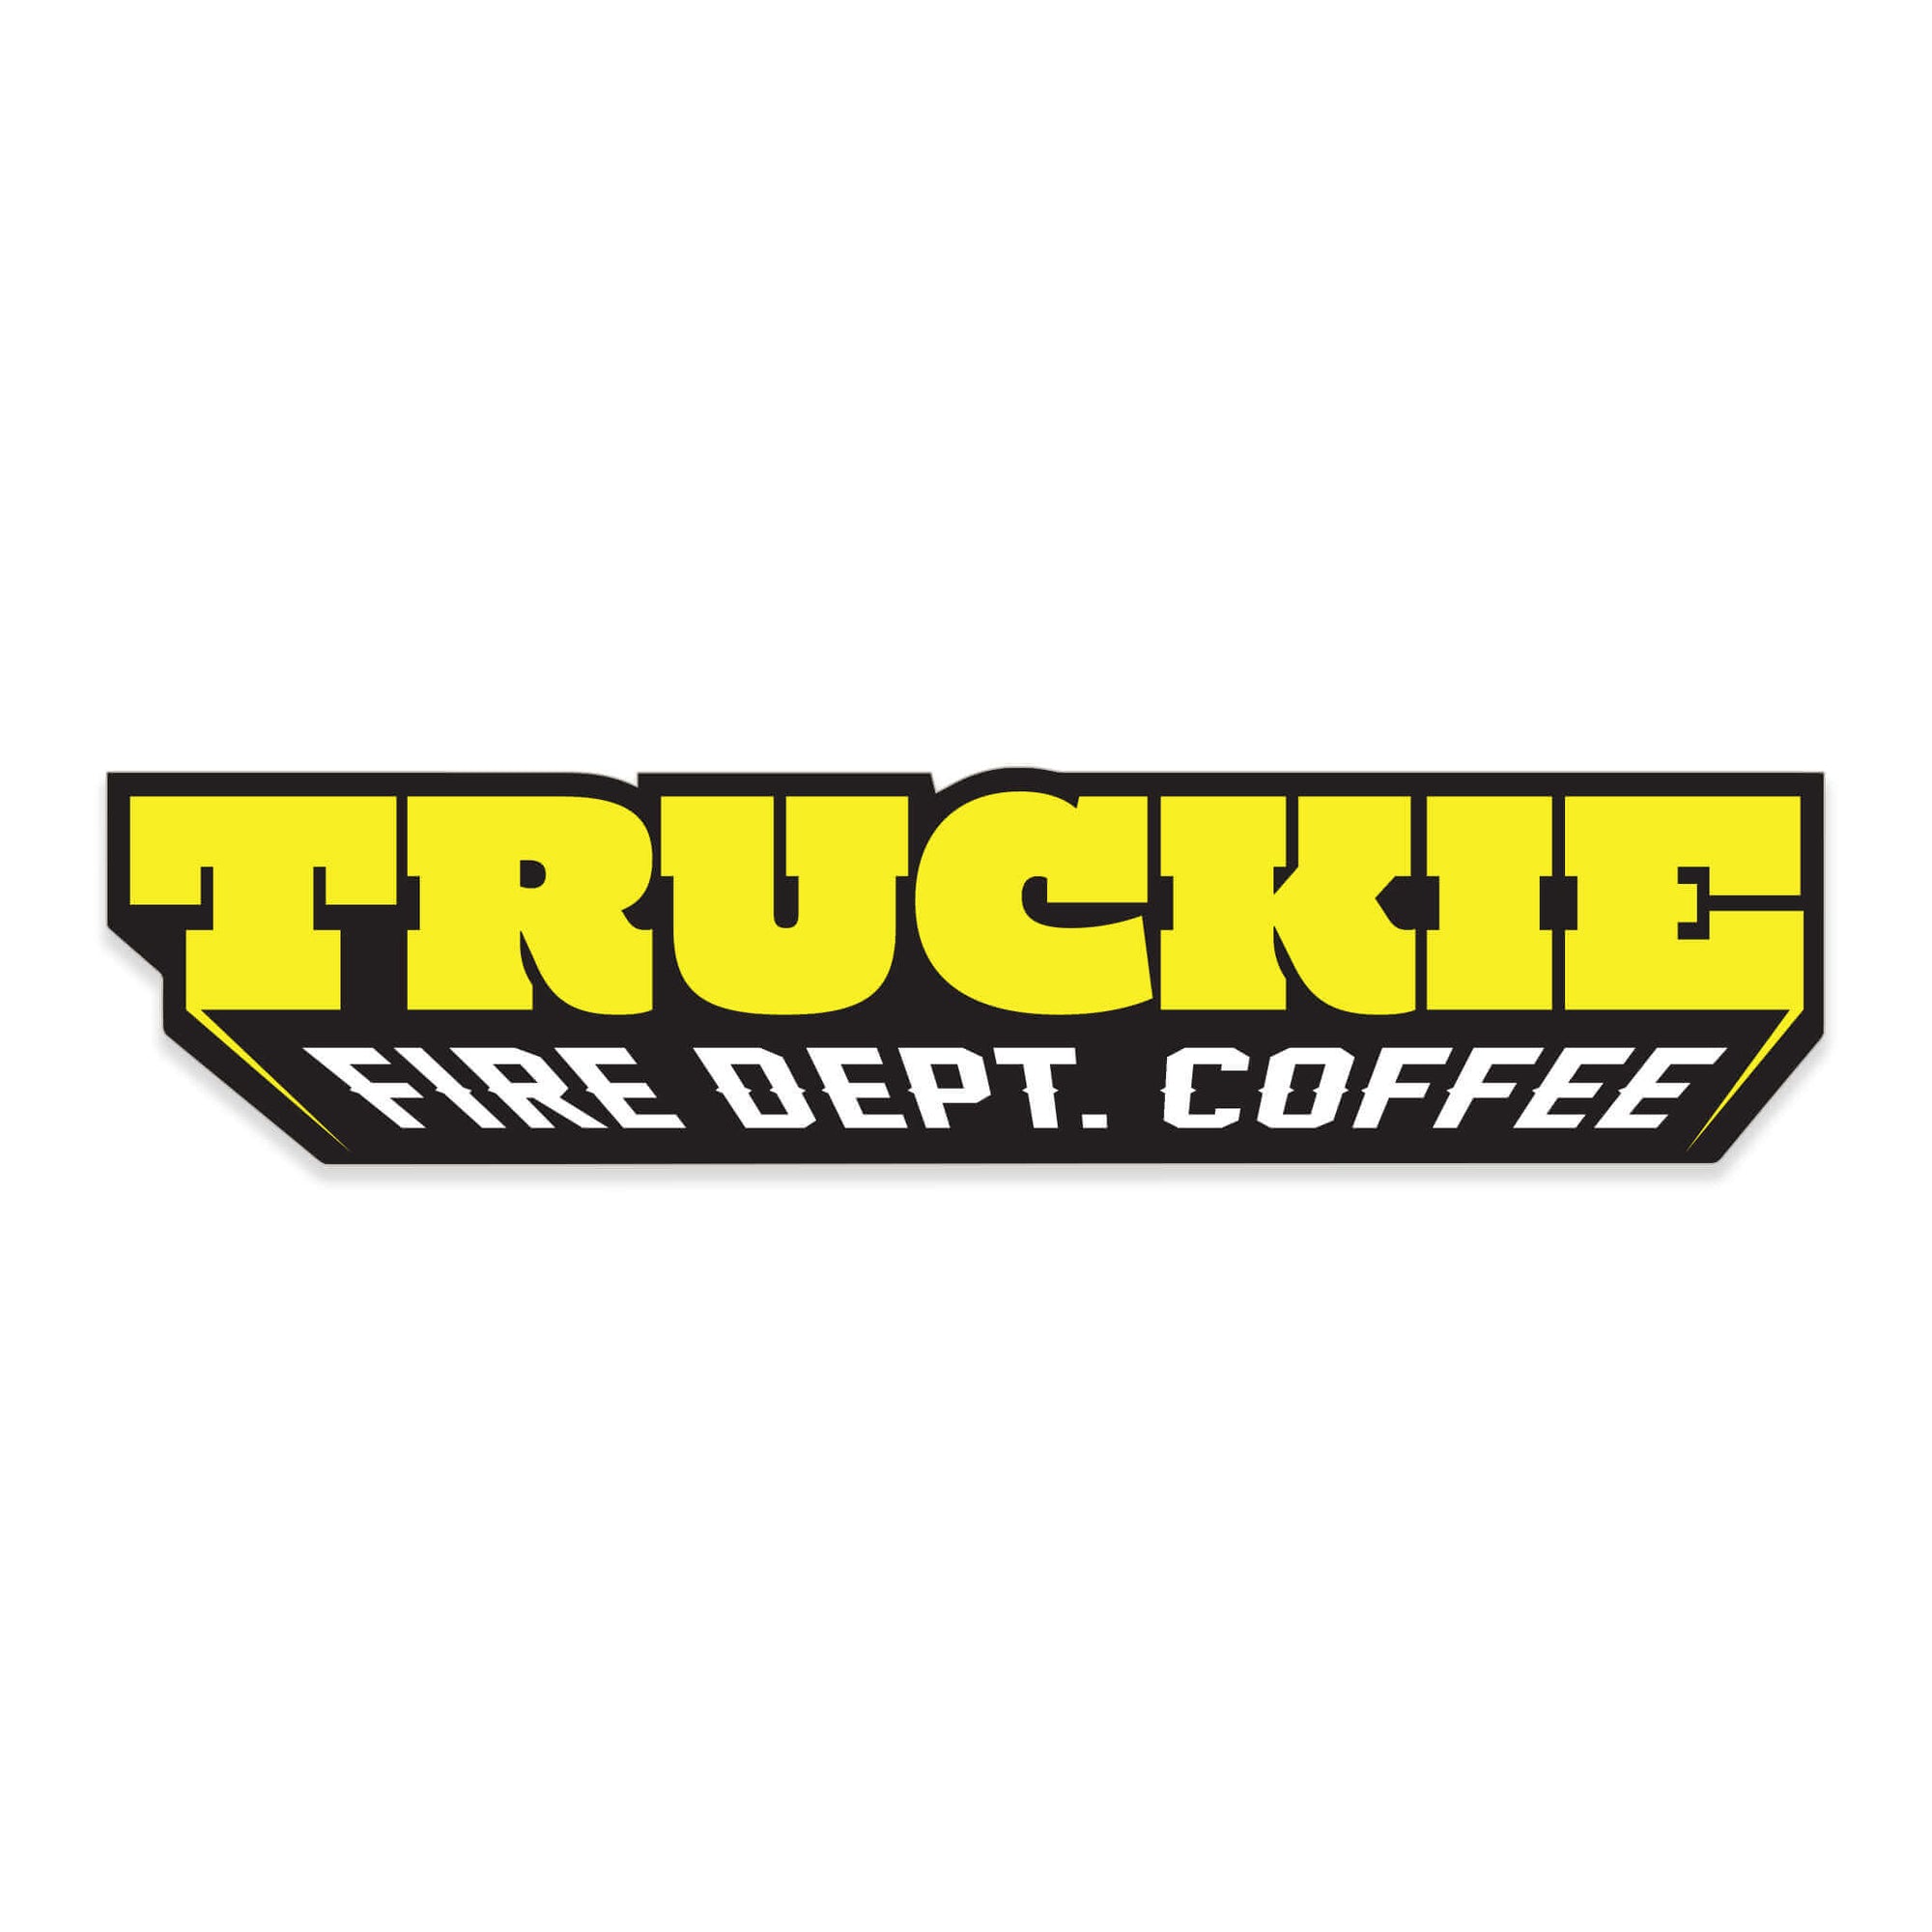 Sticker with "Truckie" in bold, yellow lettering and "Fire Dept. Coffee" below in white